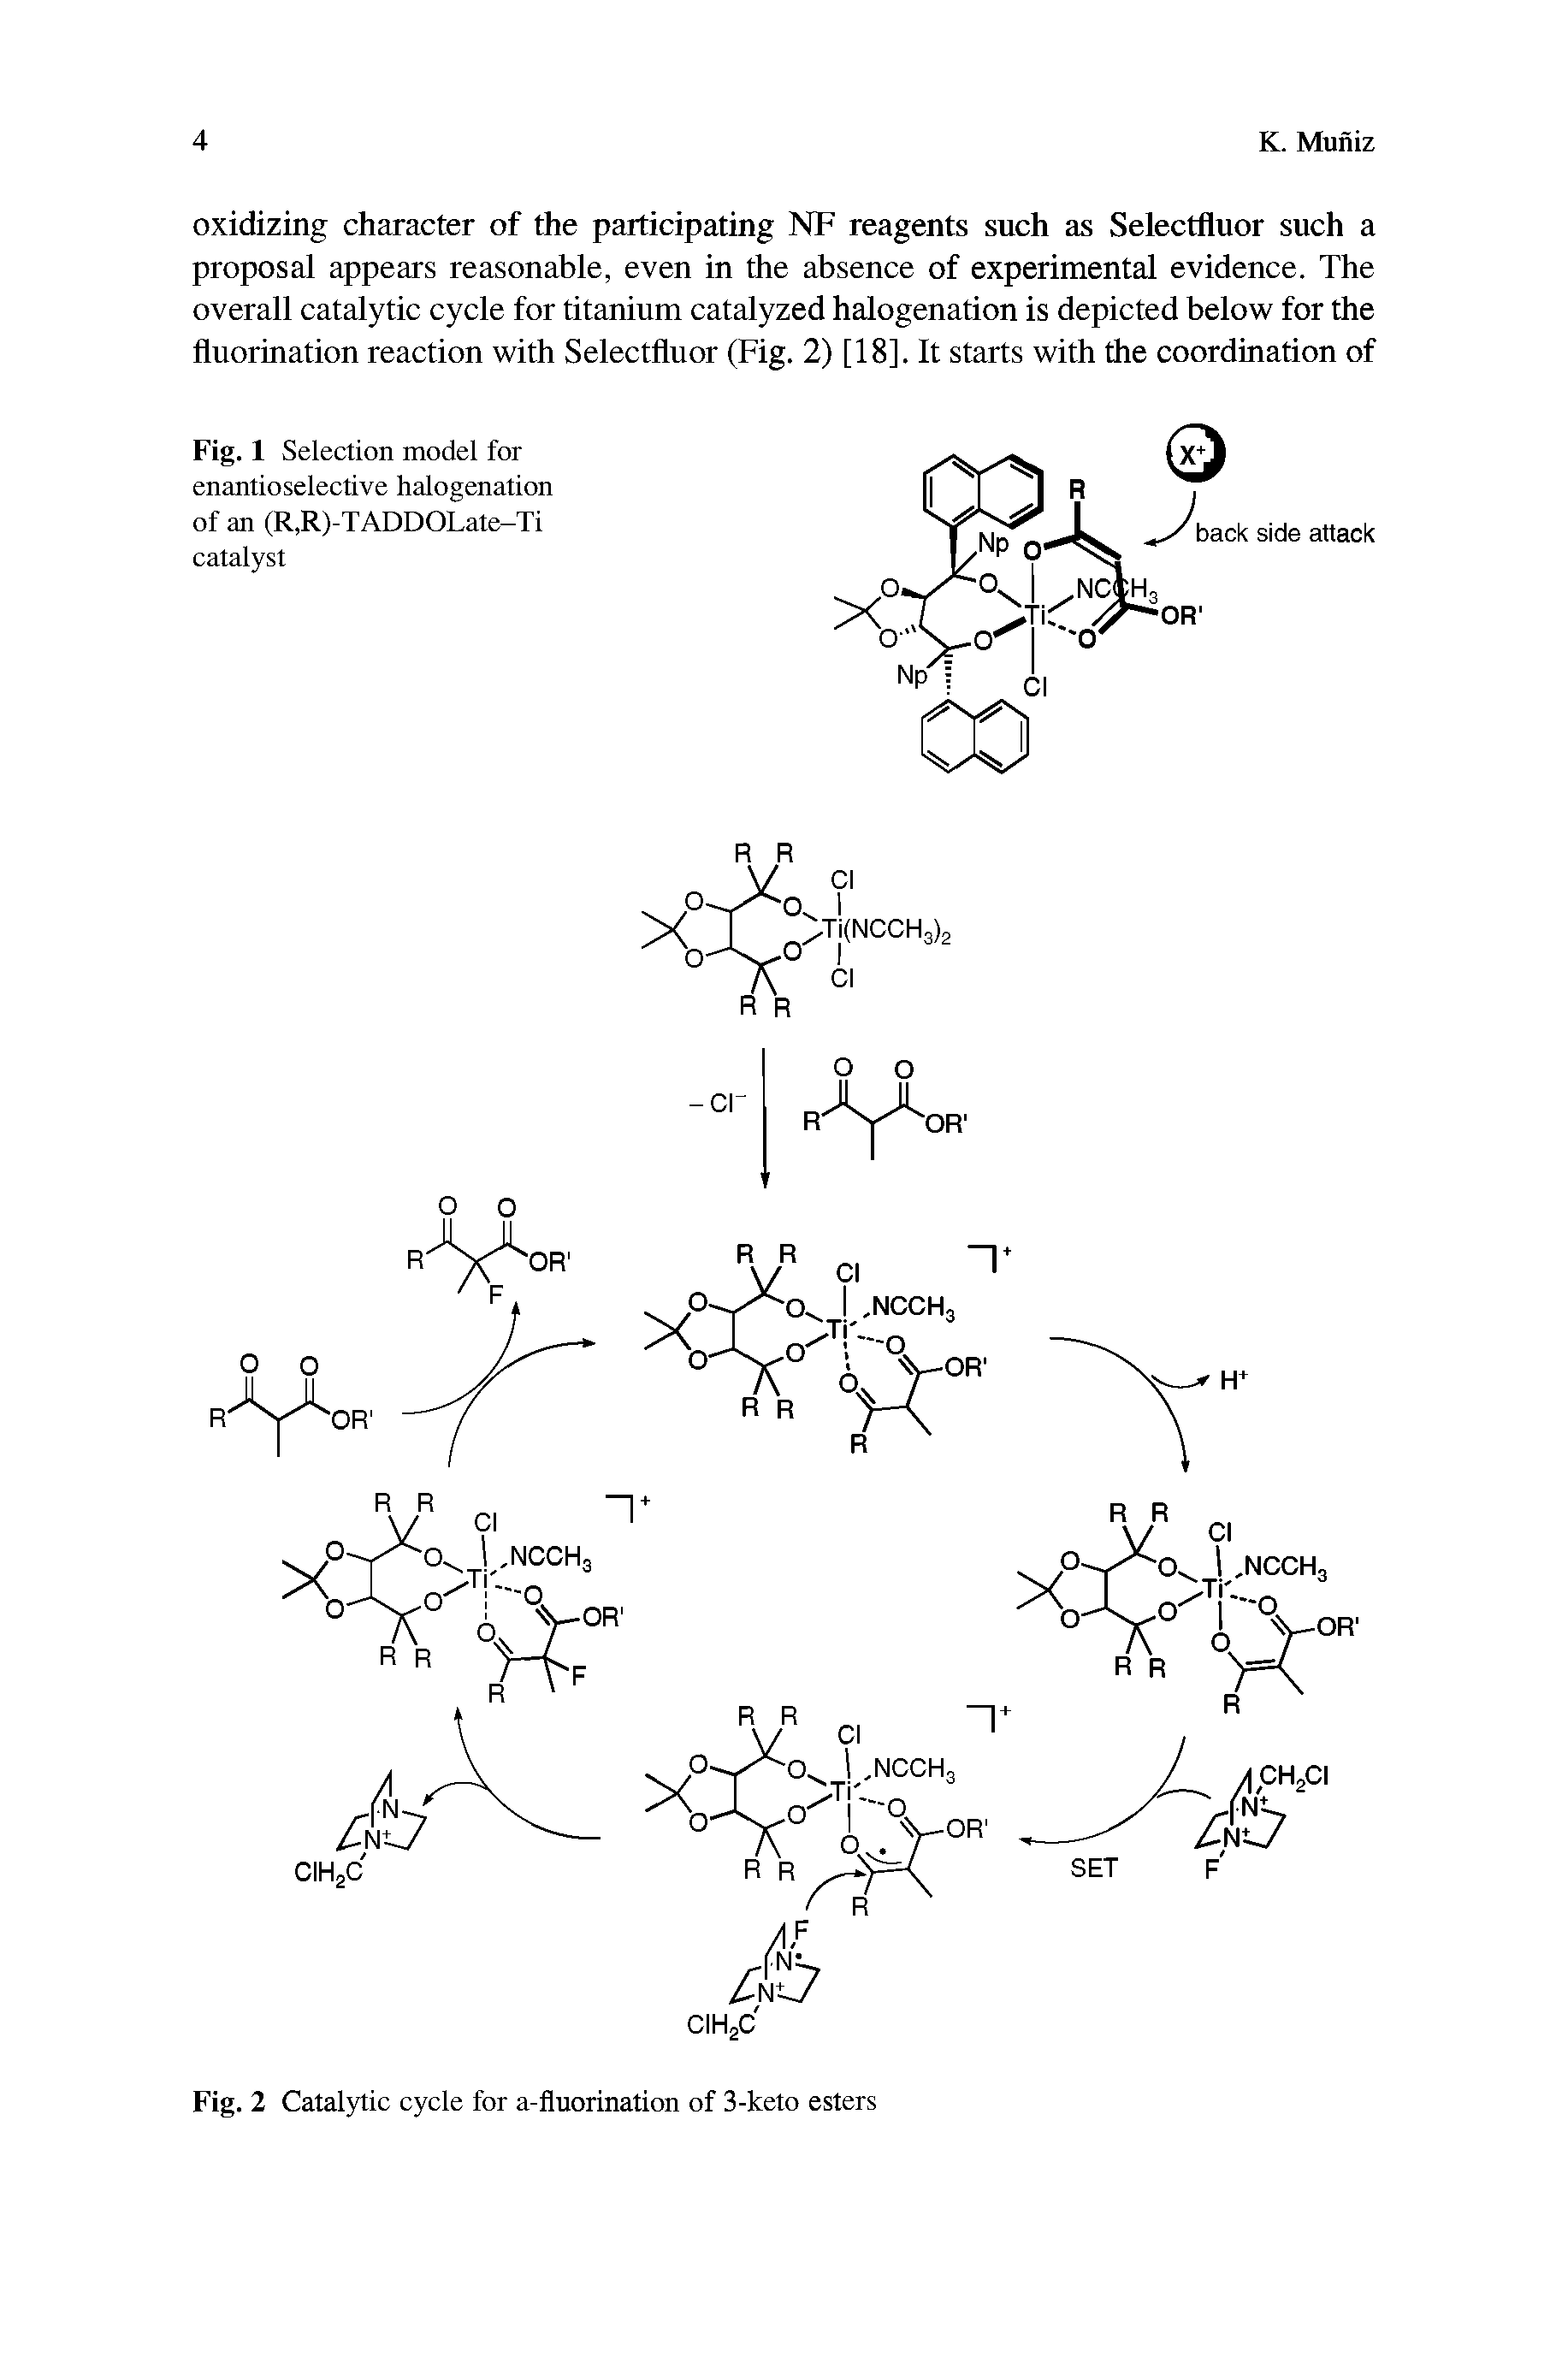 Fig. 1 Selection model for enantioselective halogenation of an (R,R)-TADDOLate-Ti catalyst...